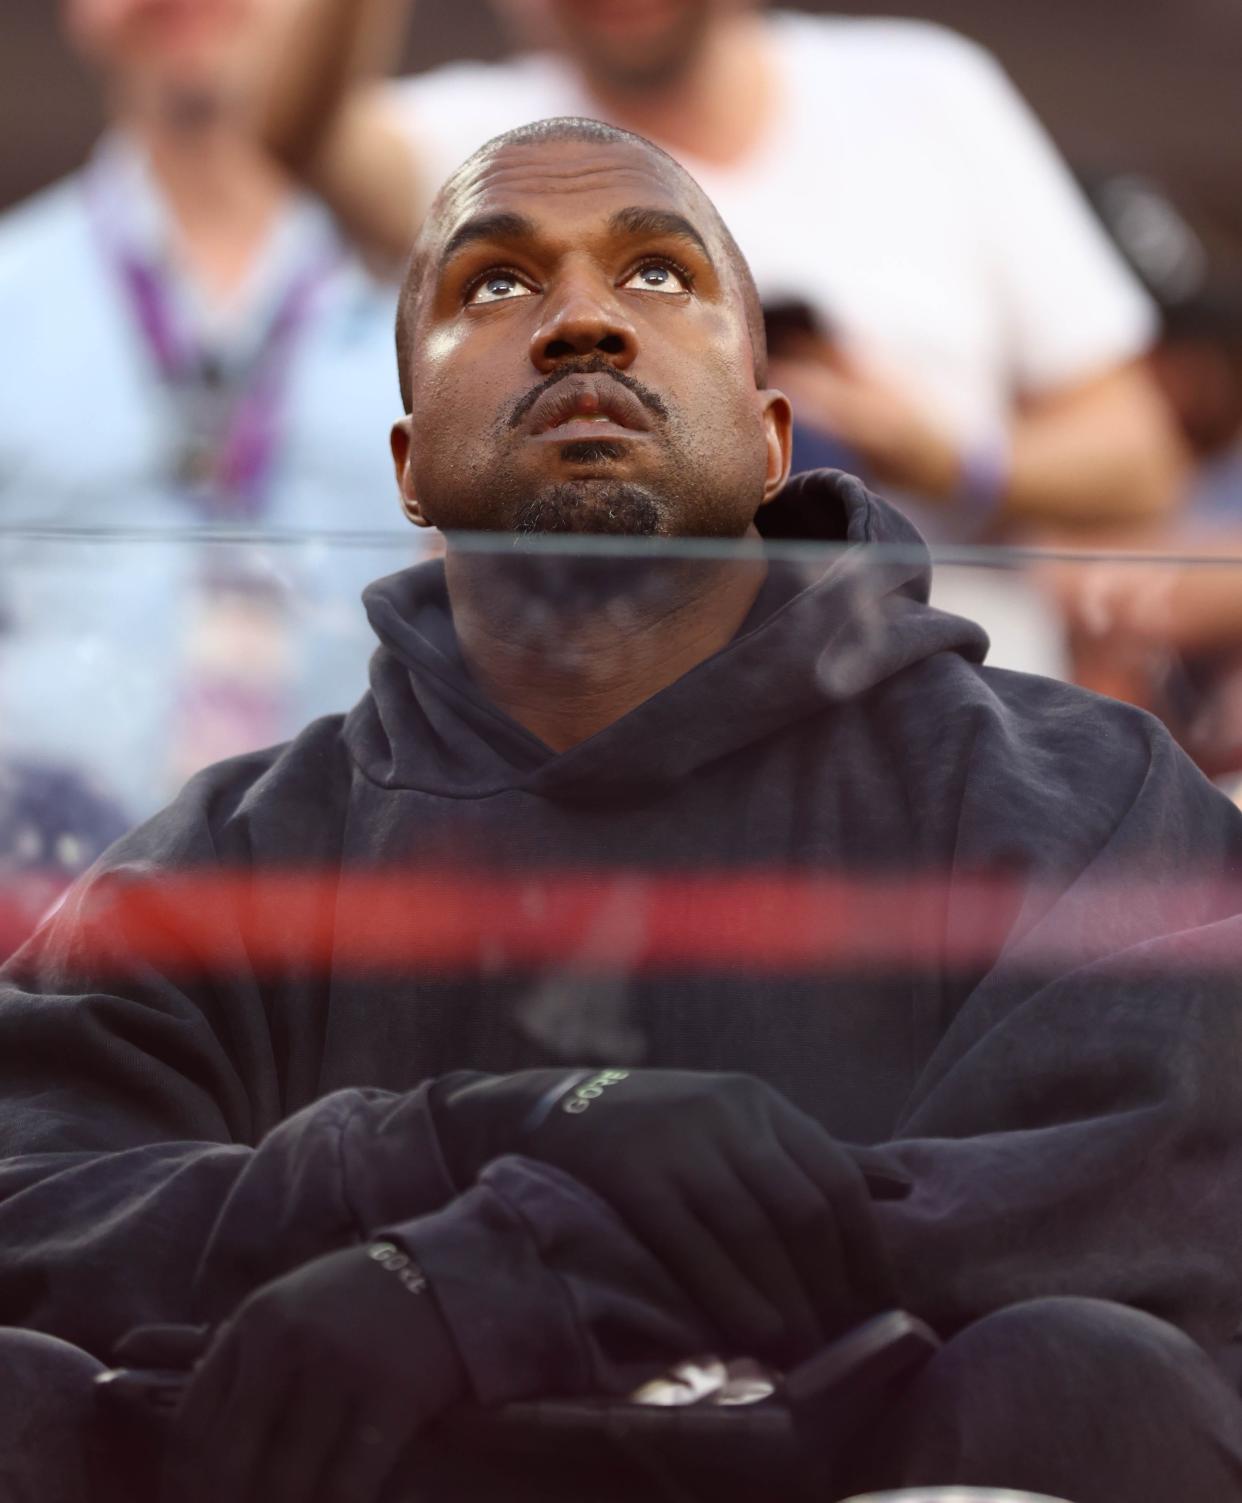 Recording artist Ye, formerly known as Kanye West, attended Super Bowl LVI.